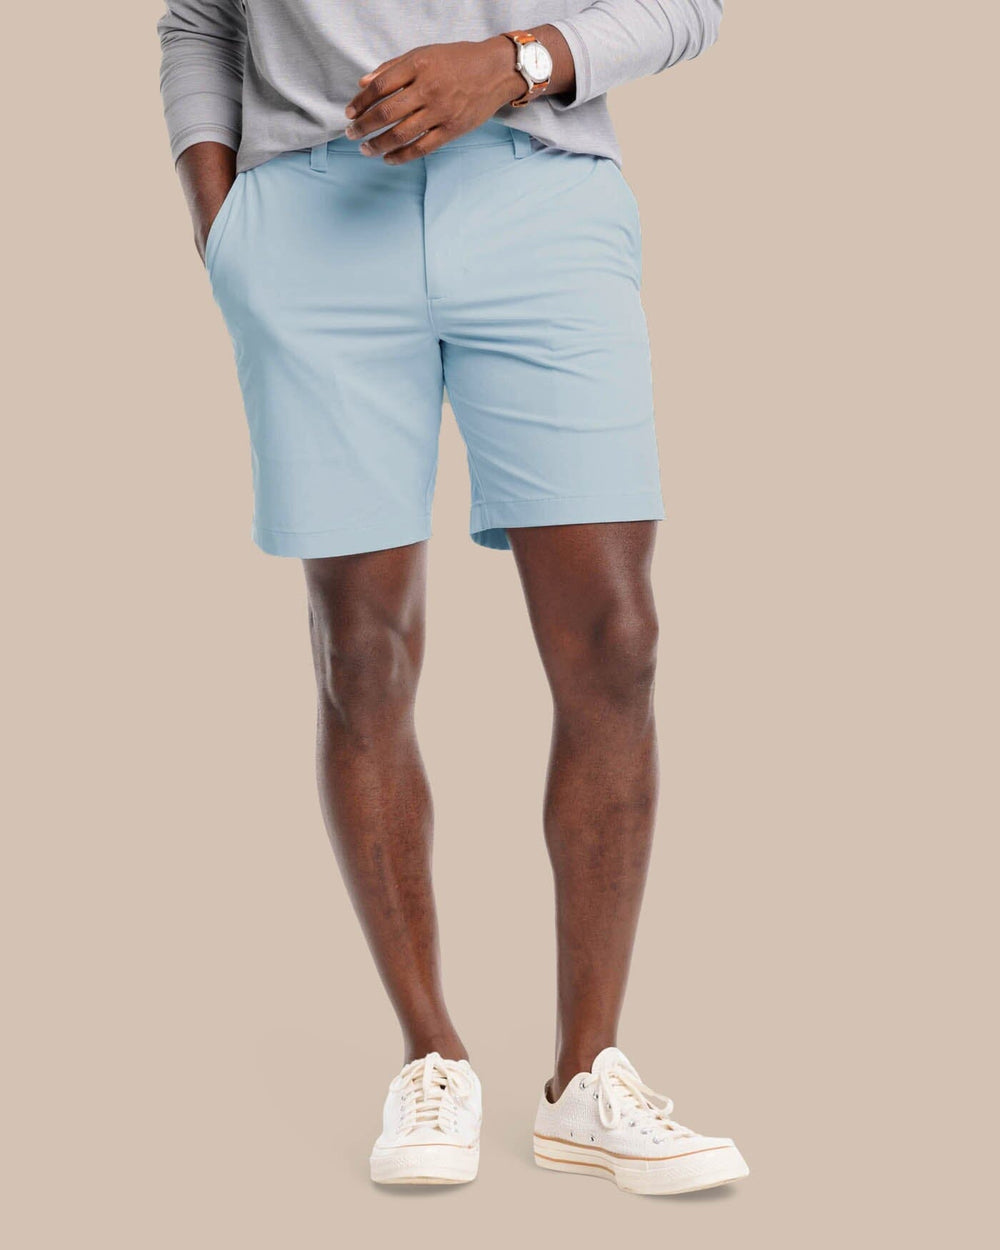 The front view of the Southern Tide gulf 8 inch brrr die performance short by Southern Tide - Fog